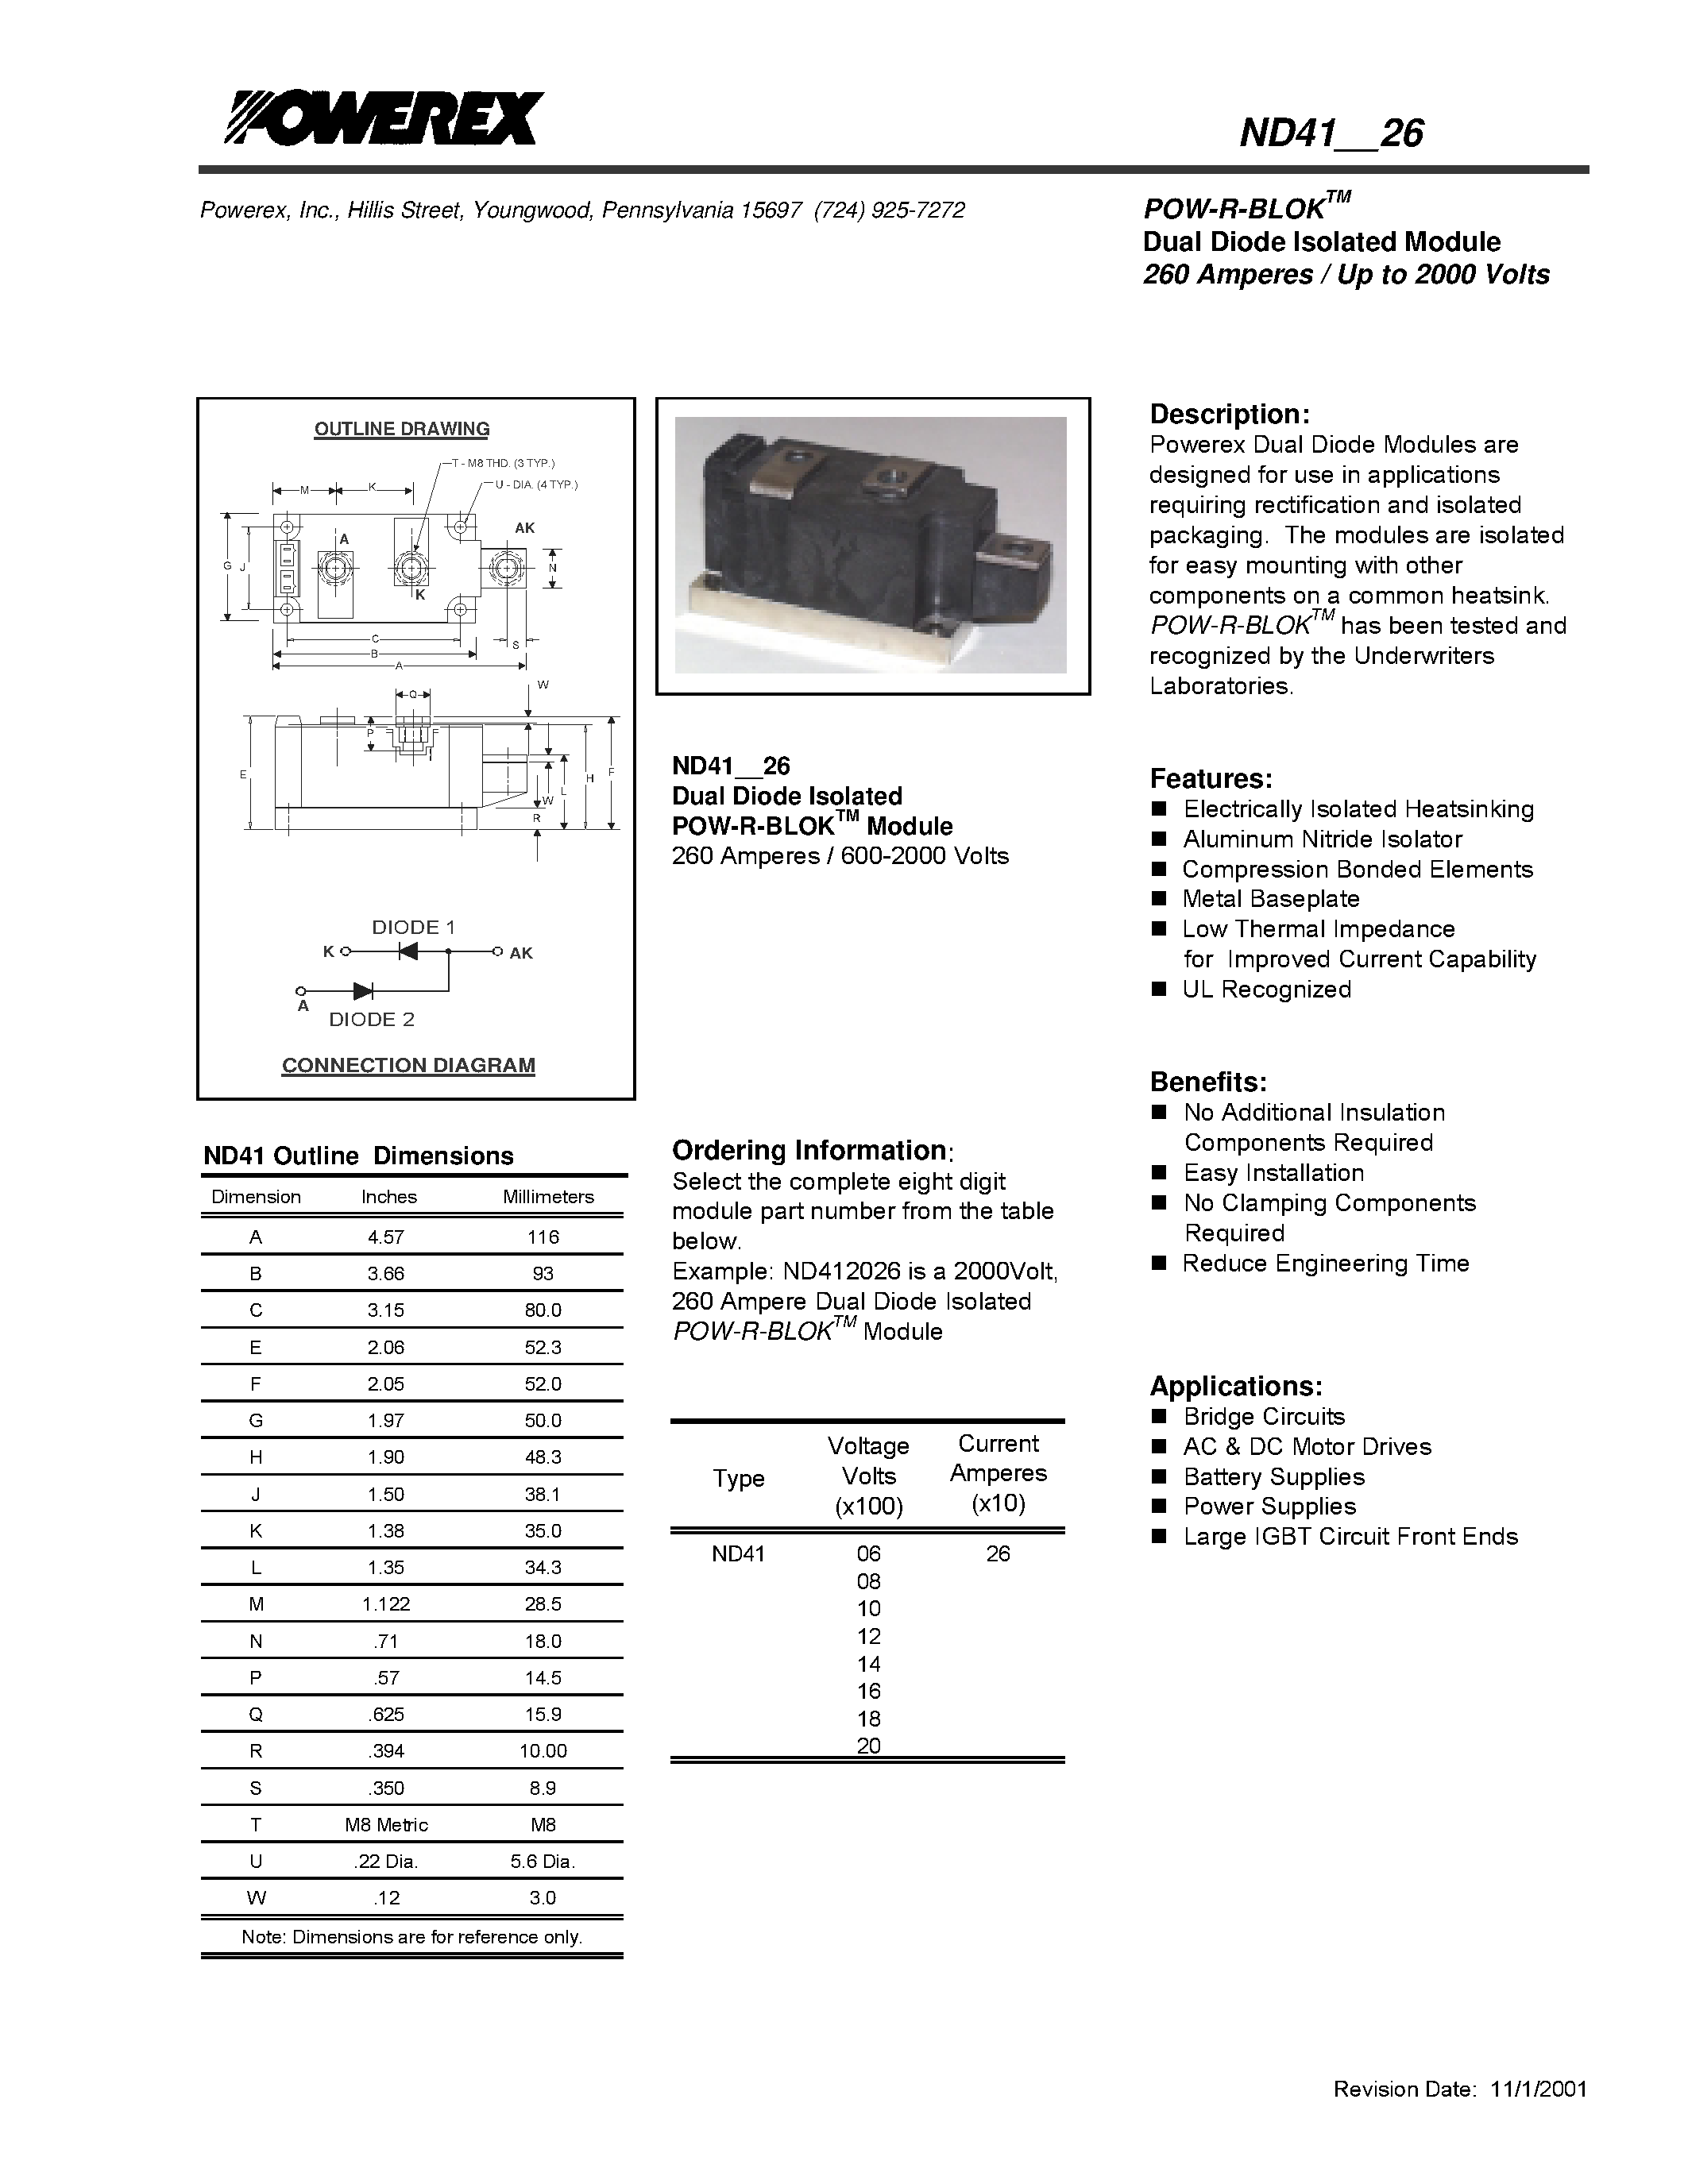 Datasheet ND411226 - POW-R-BLOK Dual Diode Isolated Module (260 Amperes / Up to 2000 Volts) page 1